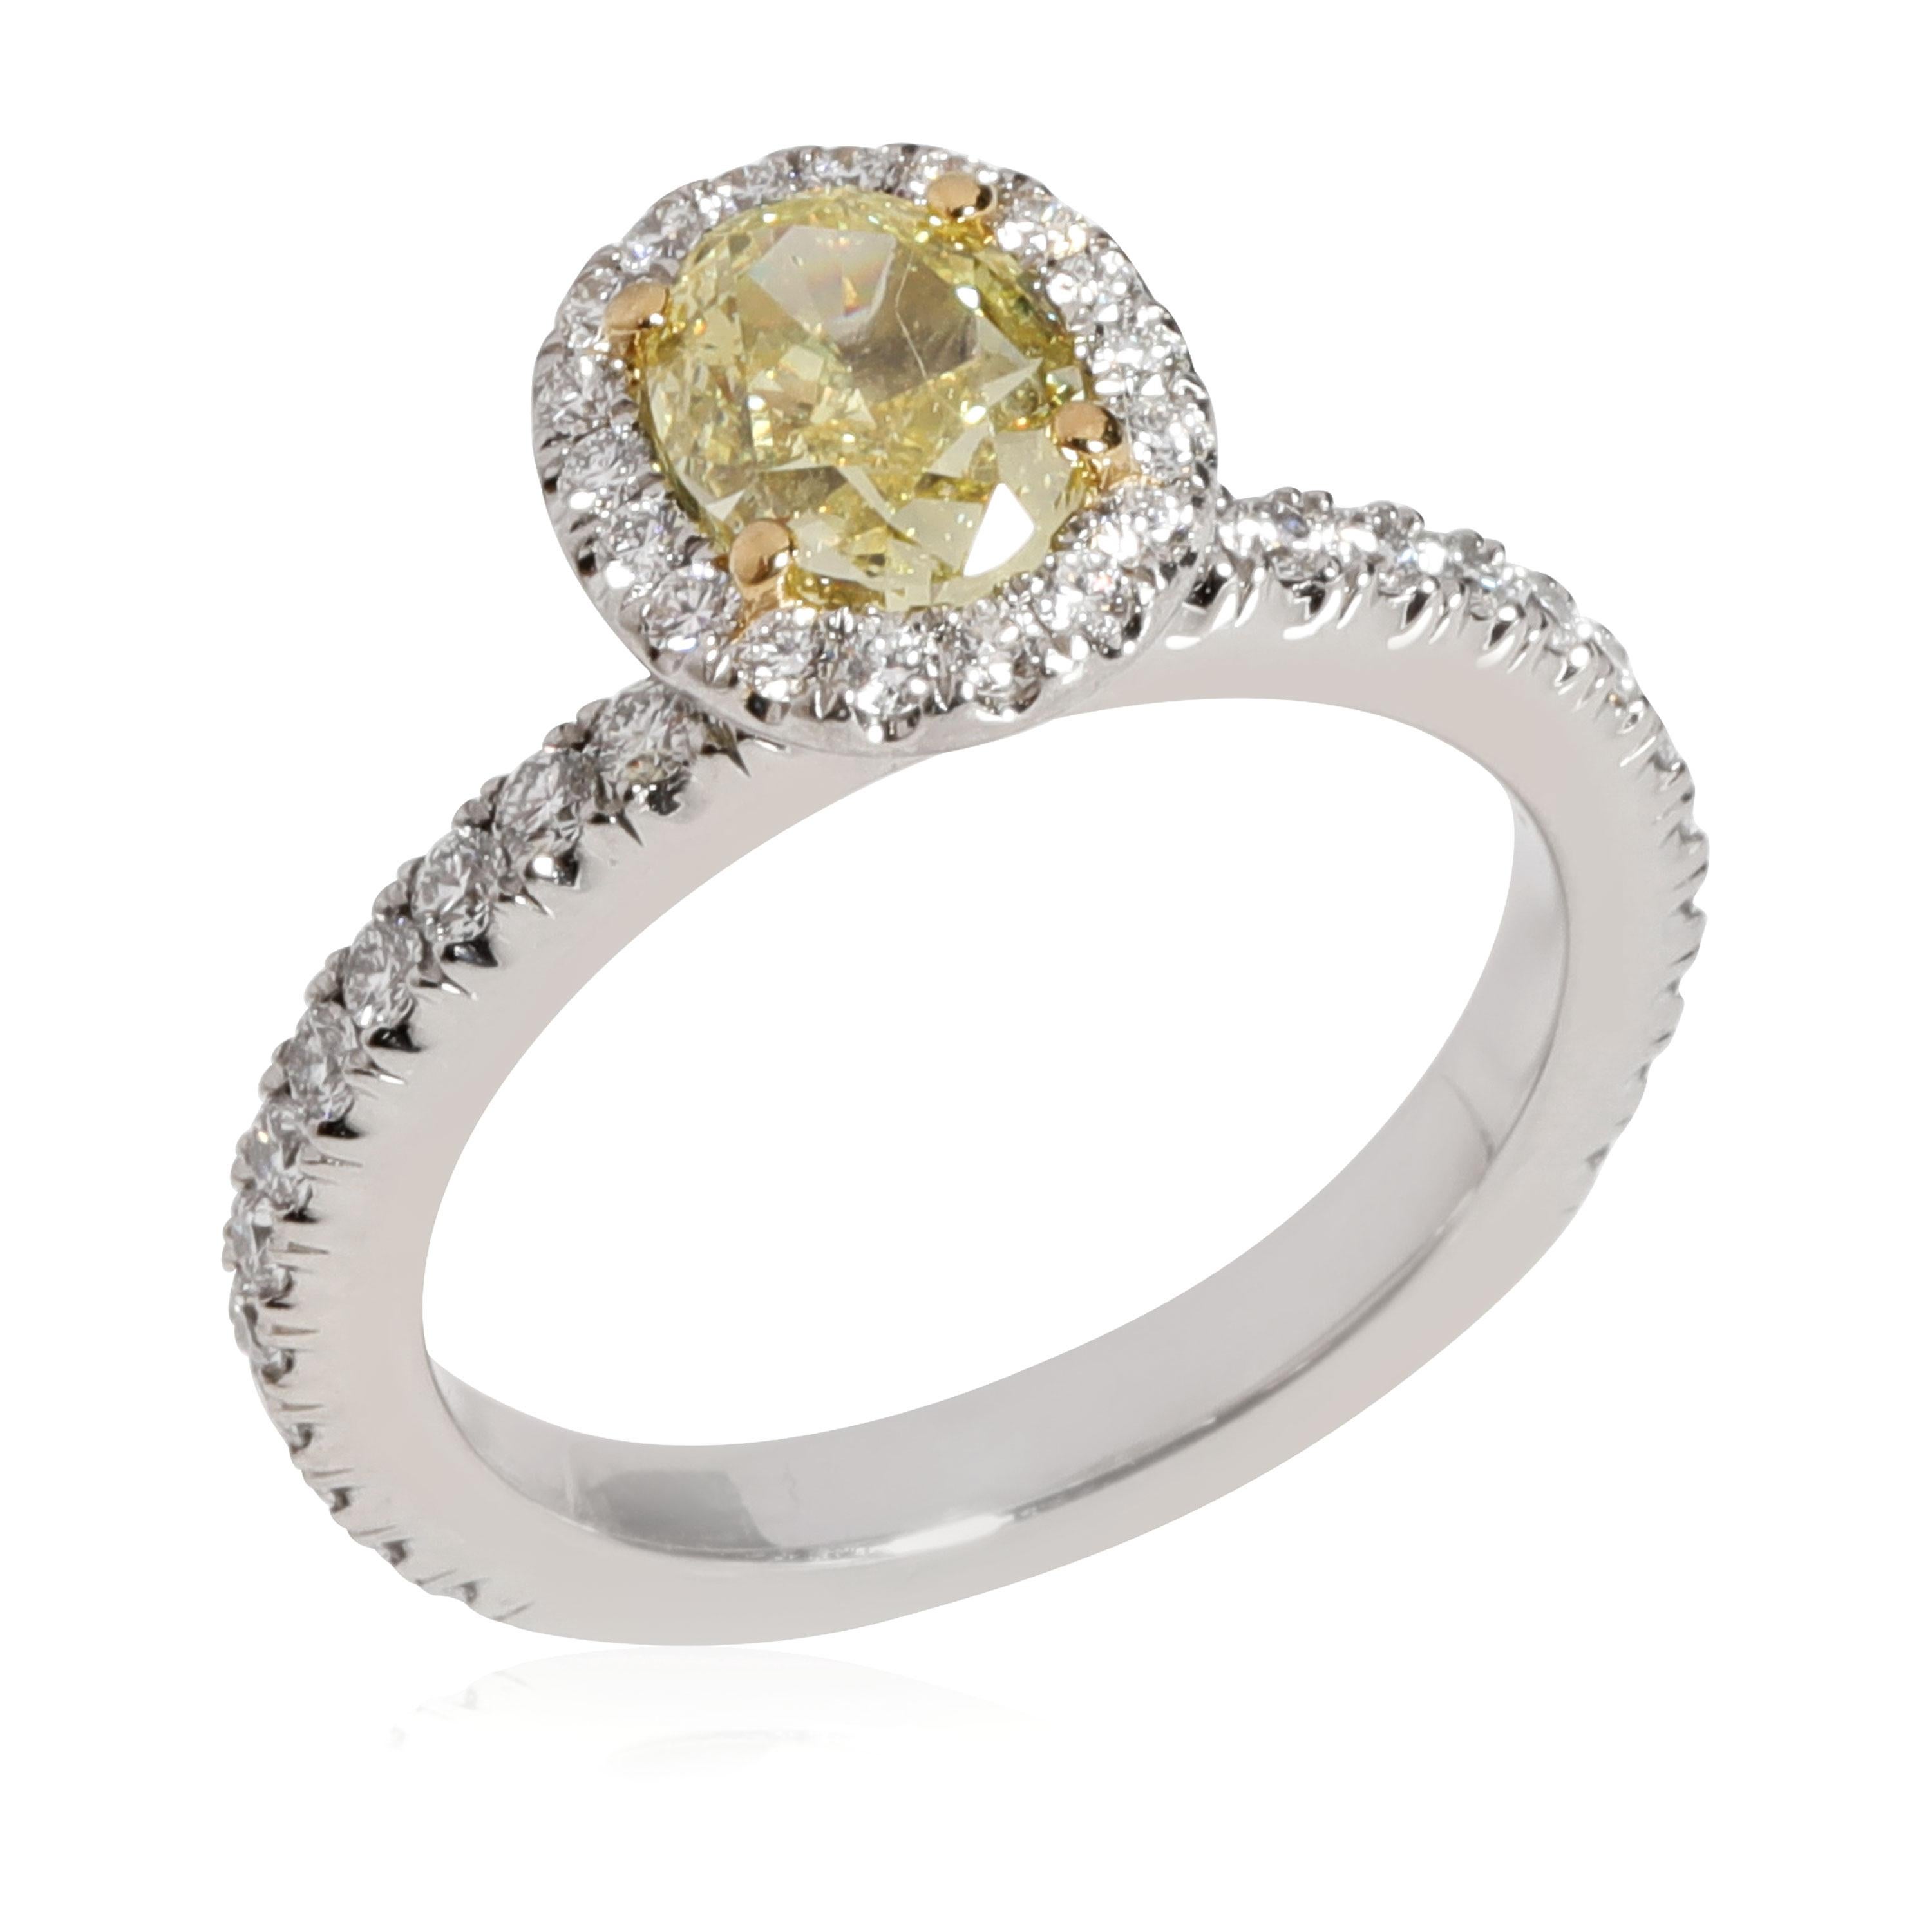 Oval Cut Debeers Fancy Yellow Diamond Engagement Ring in Platinum VS1 0.90 CTW